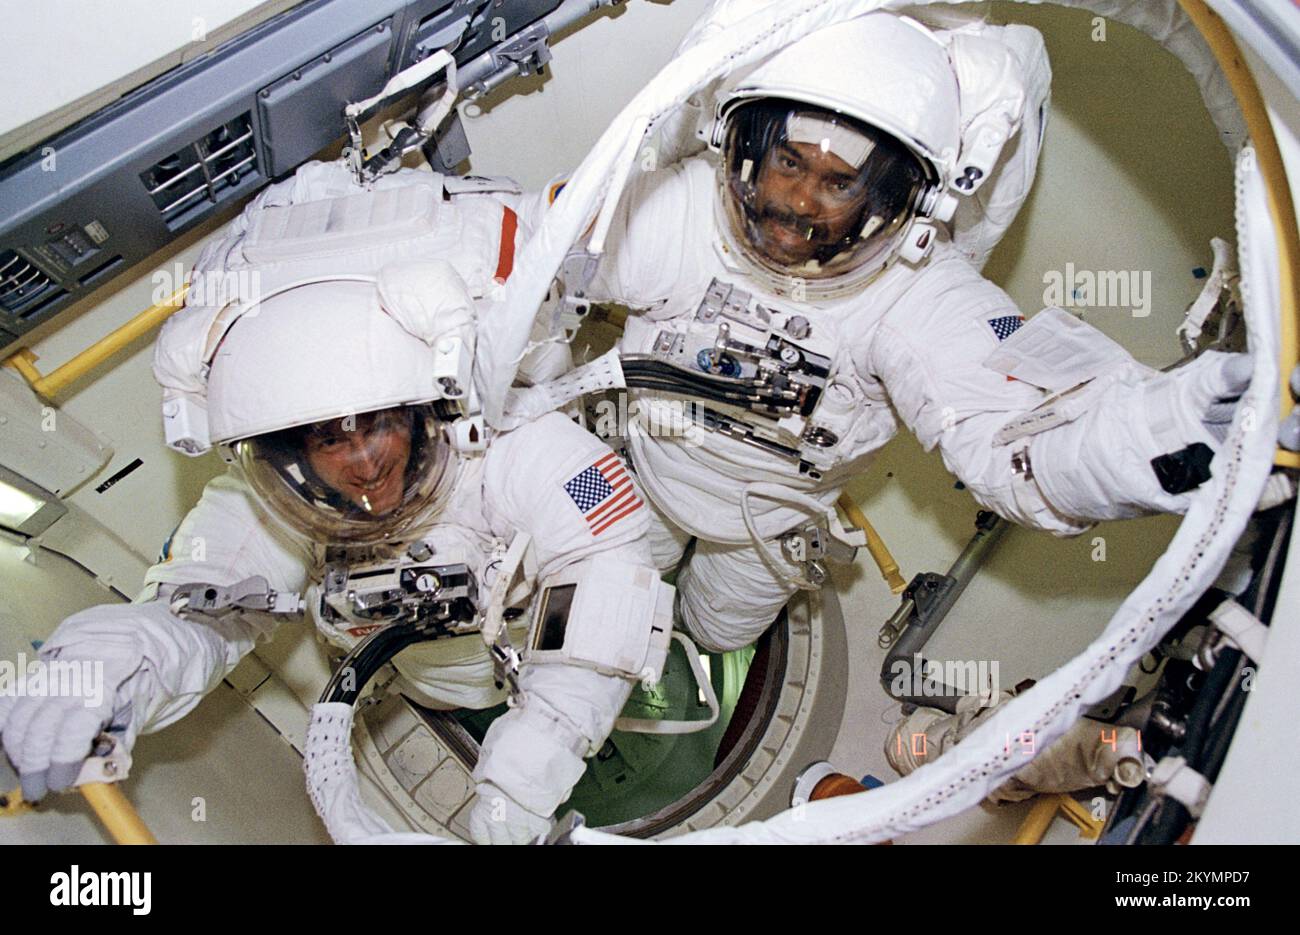 Astronauts Harris and Foale ready to egress airlock for EVA Astronauts Bernard A. Harris Jr., STS-63 payload commander, (top right) and C. Michael Foale, mission specialist, are ready to egress airlock for an extravehicular activity on February 9, 1995. Others onboard the space shuttle Discovery were astronauts James D. Wetherbee, mission commander; Eileen M. Collins, pilot; mission specialists Janice E. Voss, and cosmonaut Vladimir G. Titov. On this spacewalk Harris became the first African-American to walk in space and Foale became the first British citizen to walk in space. Date Feb 9 1995 Stock Photo